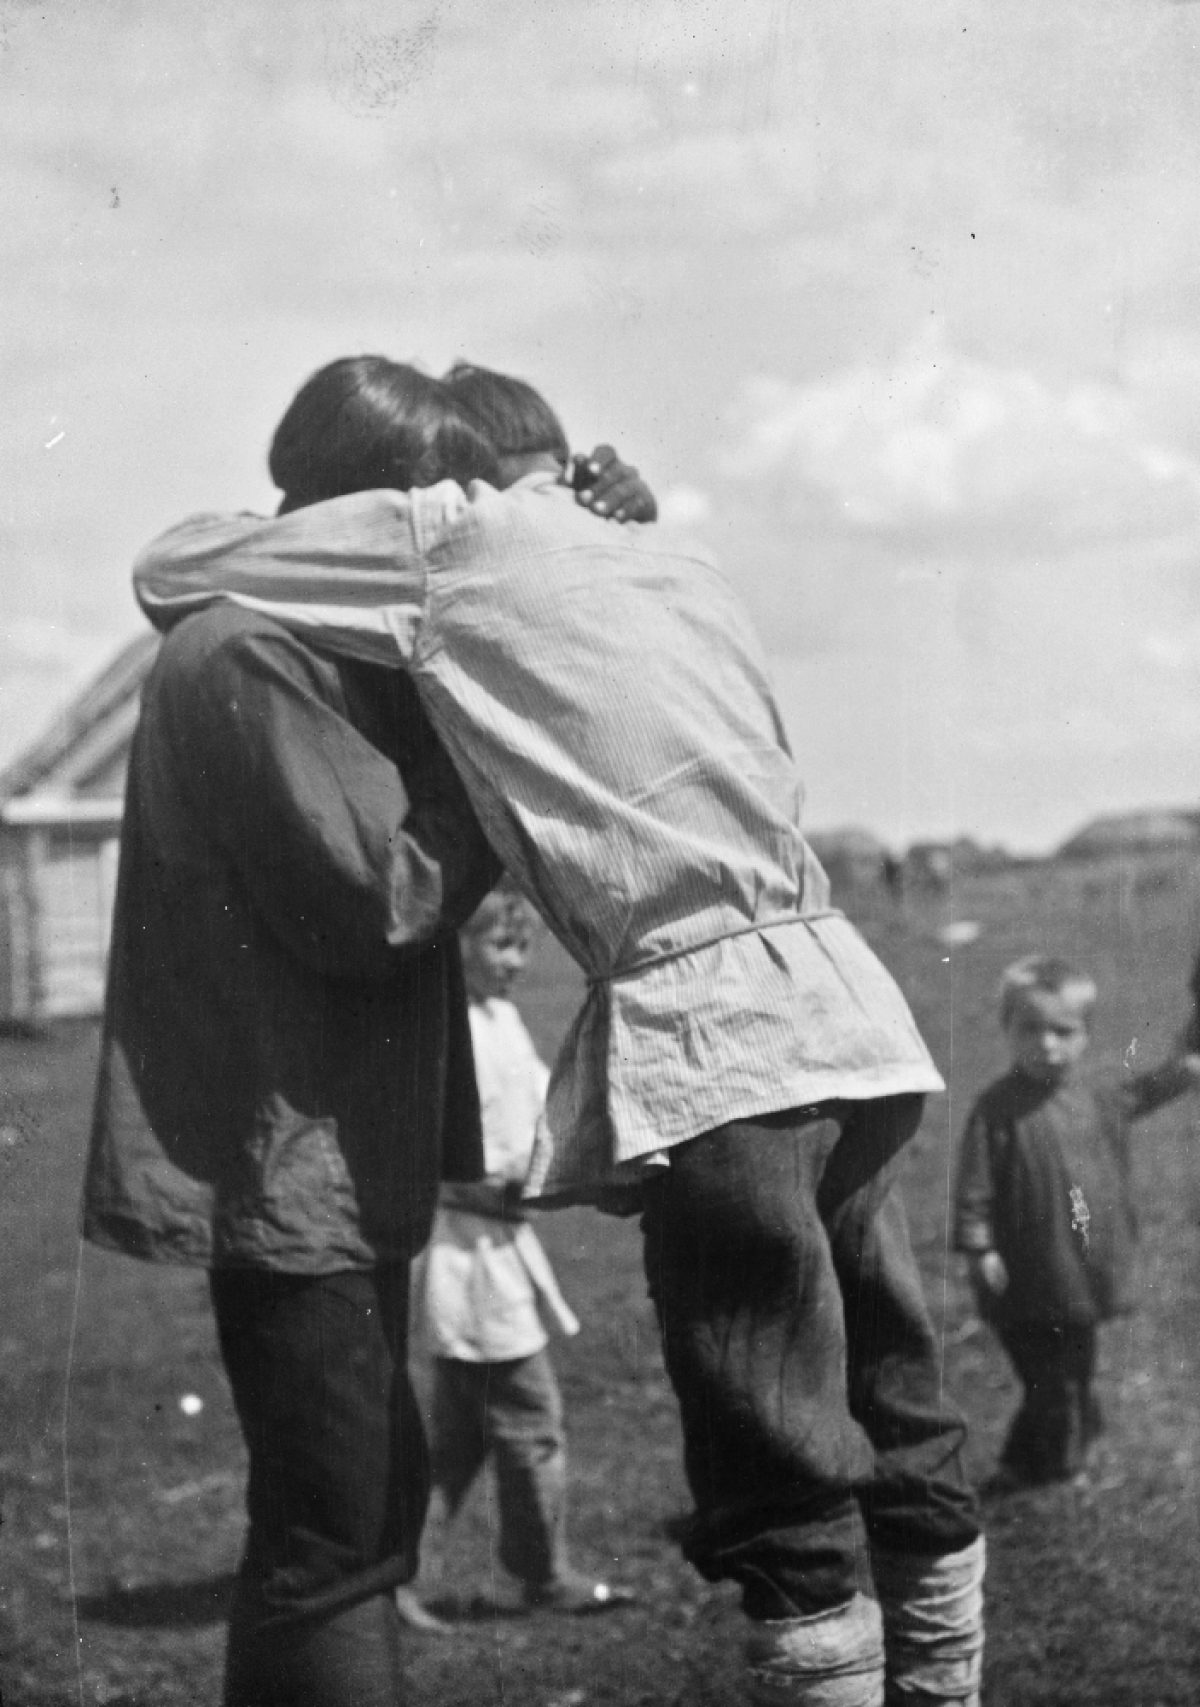 Childhood friends say goodbye before going to war in Vechkanovo, Buguruslansky District, Mordovia, 1914. Photo: A. O. Väisänen / Picture Collections of the Finnish Heritage Agency